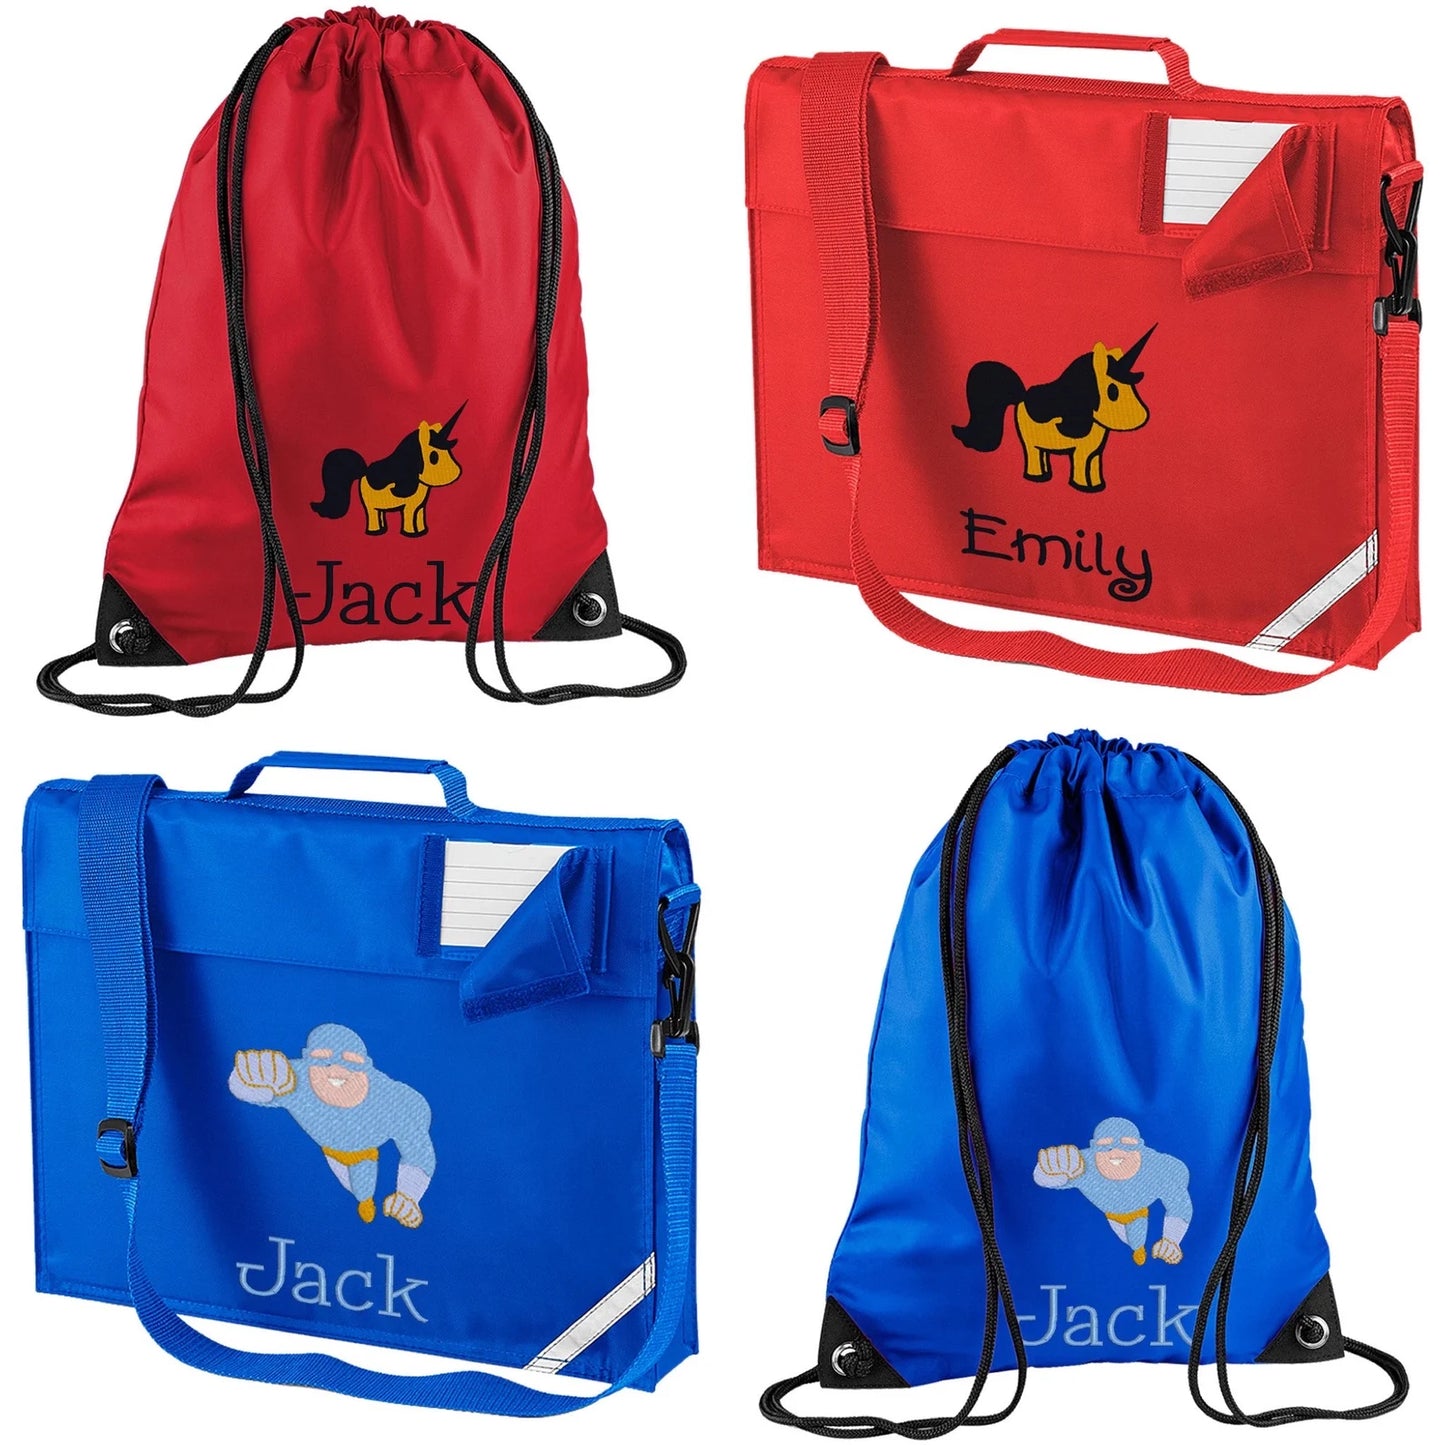 Set - matching book bag and pe bag for school. Personalised with name and motif.